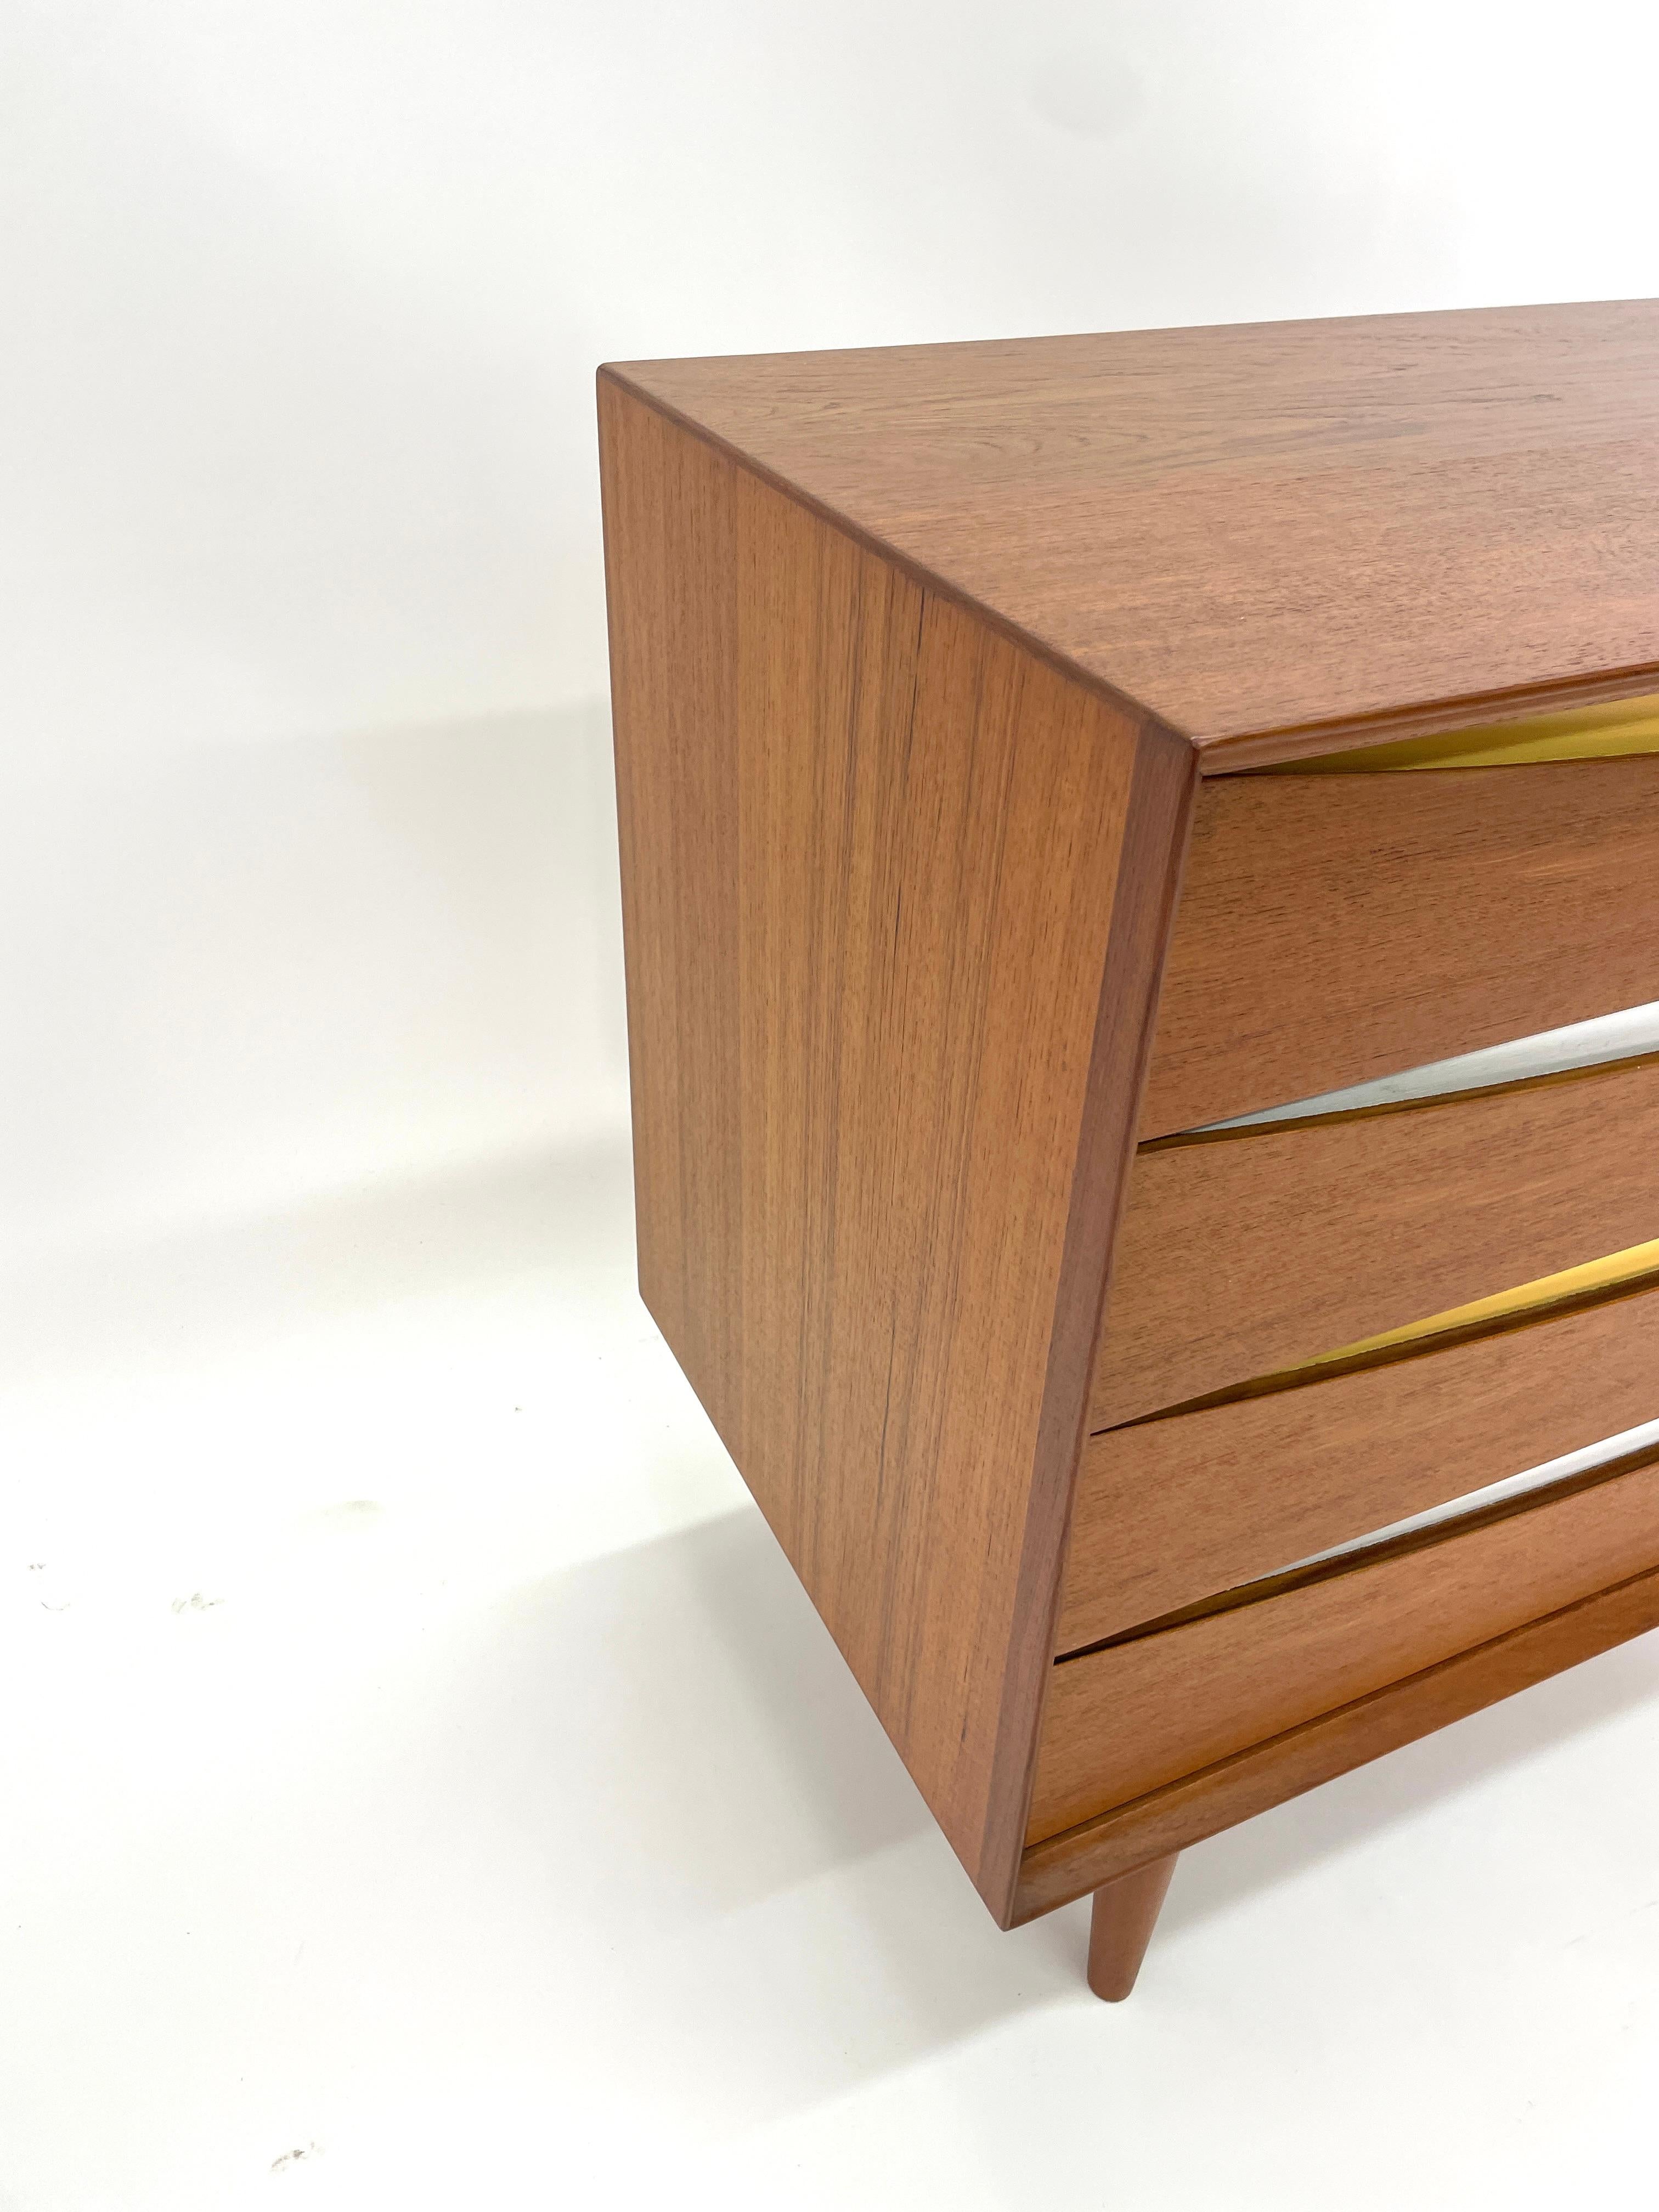 Arne Vodder Triennale 4 Drawer Dresser by Sibast (2 available) In Excellent Condition For Sale In San Diego, CA